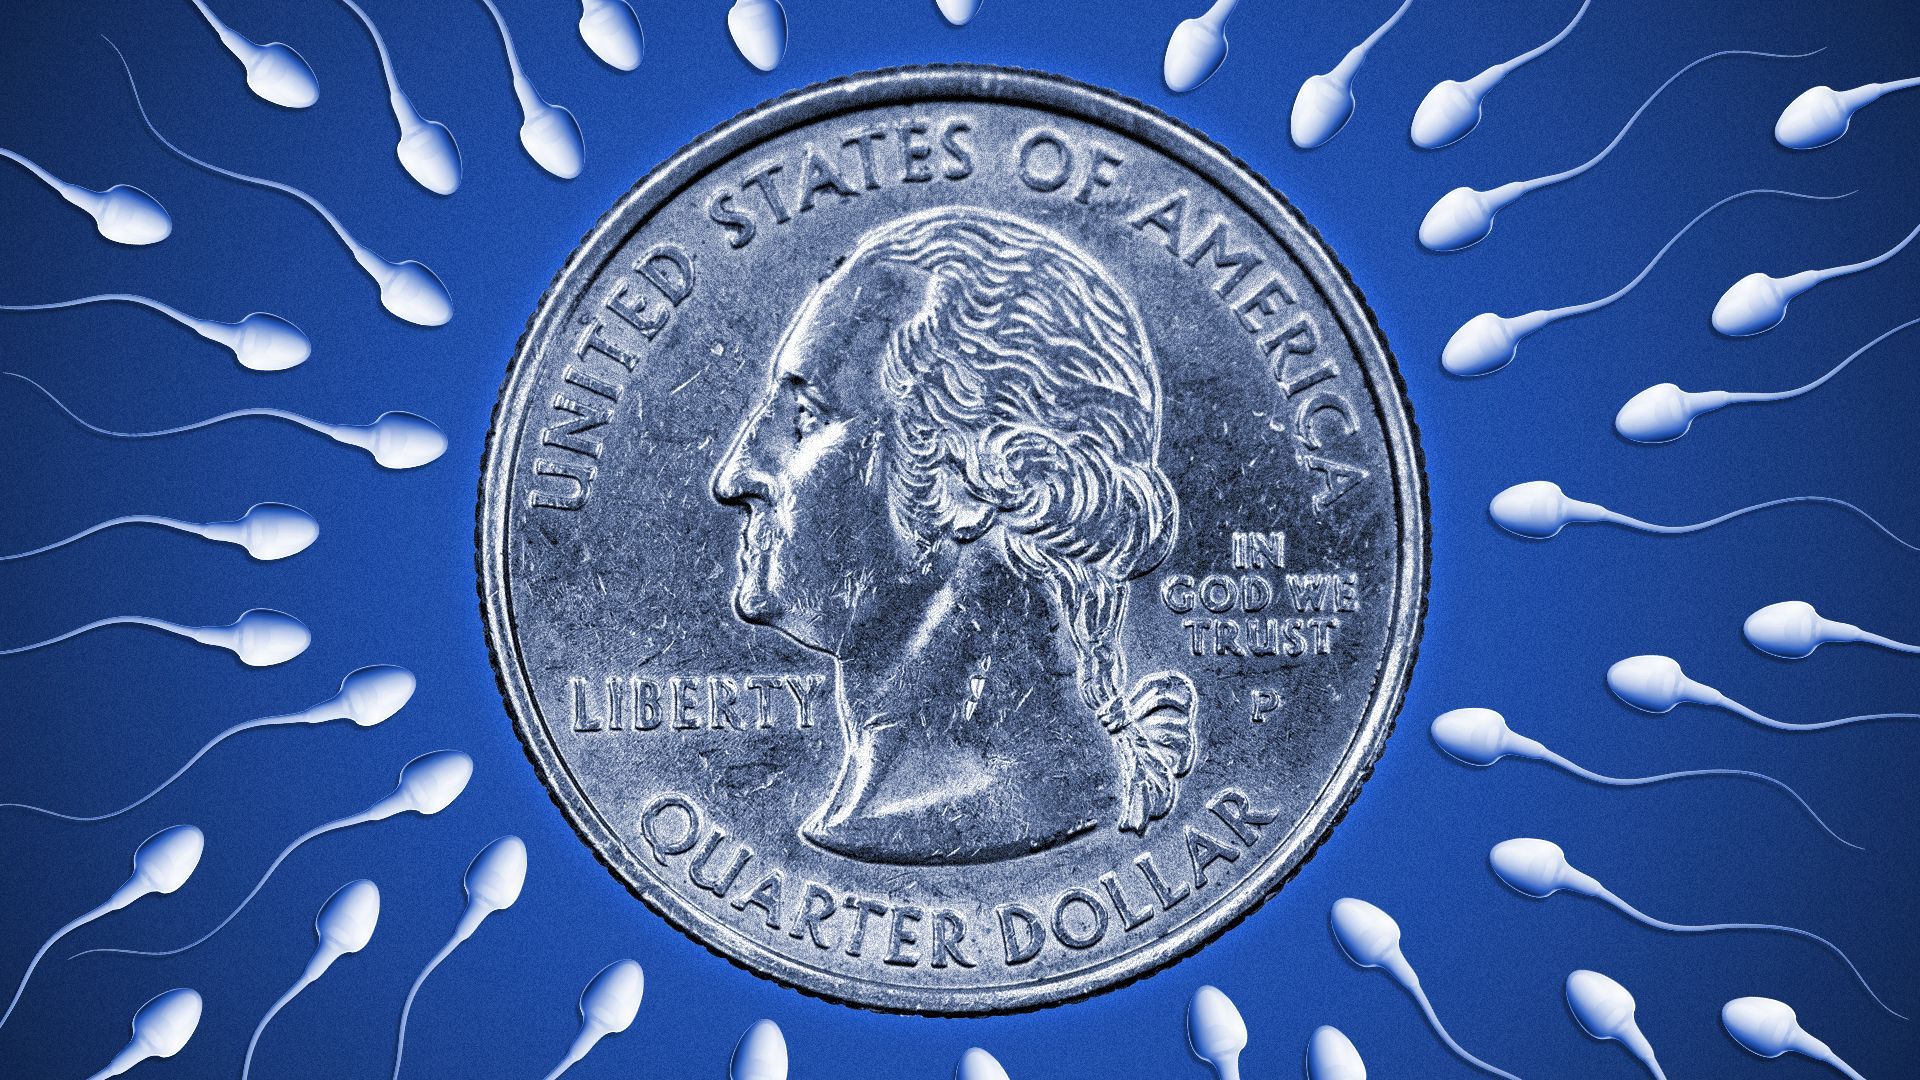 Illustration of a quarter surrounded by sperm.